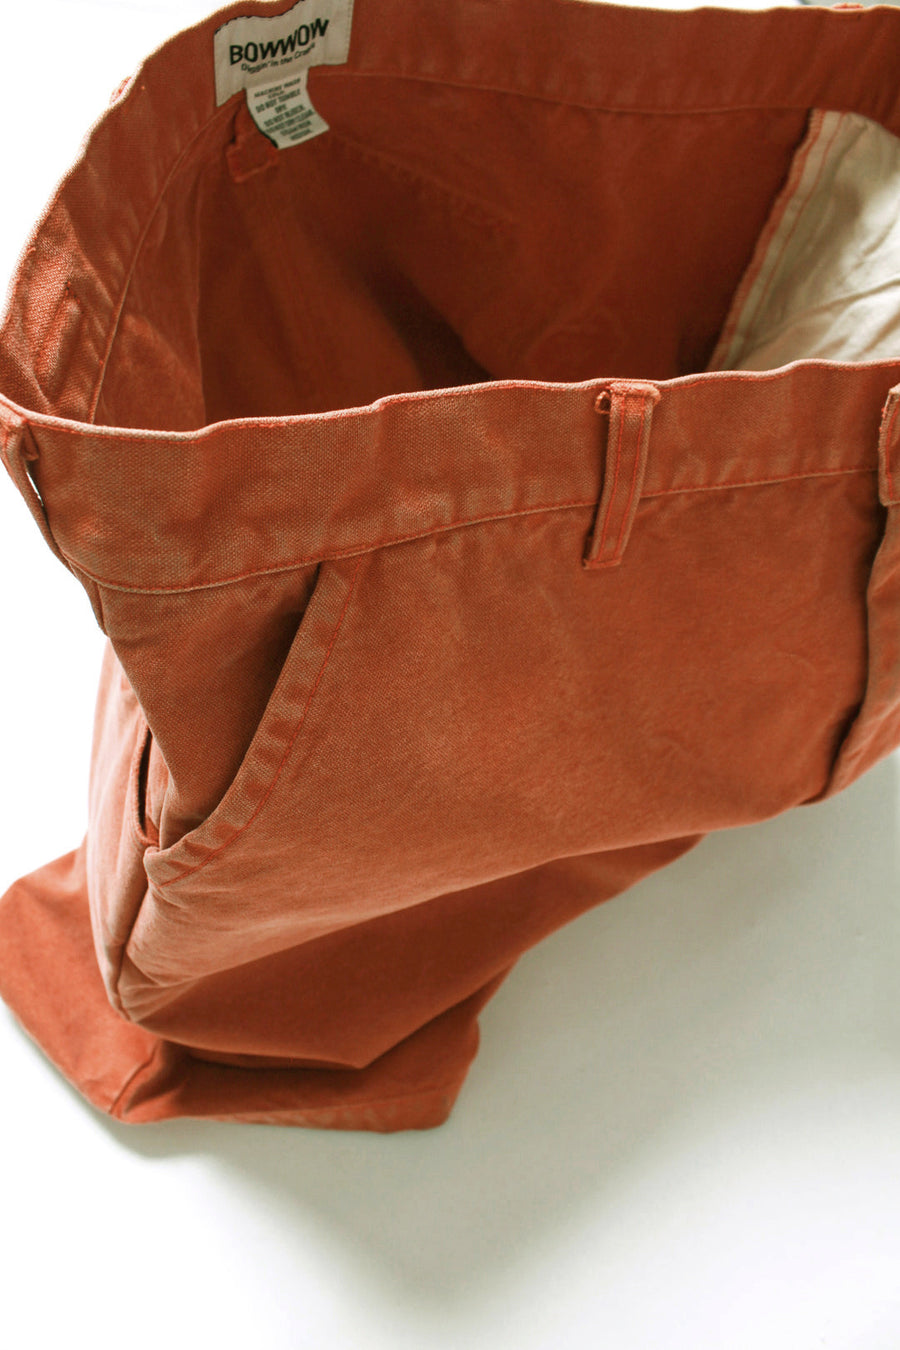 〈BOW WOW〉OUTDOOR SHORTS / ORANGE AGEING